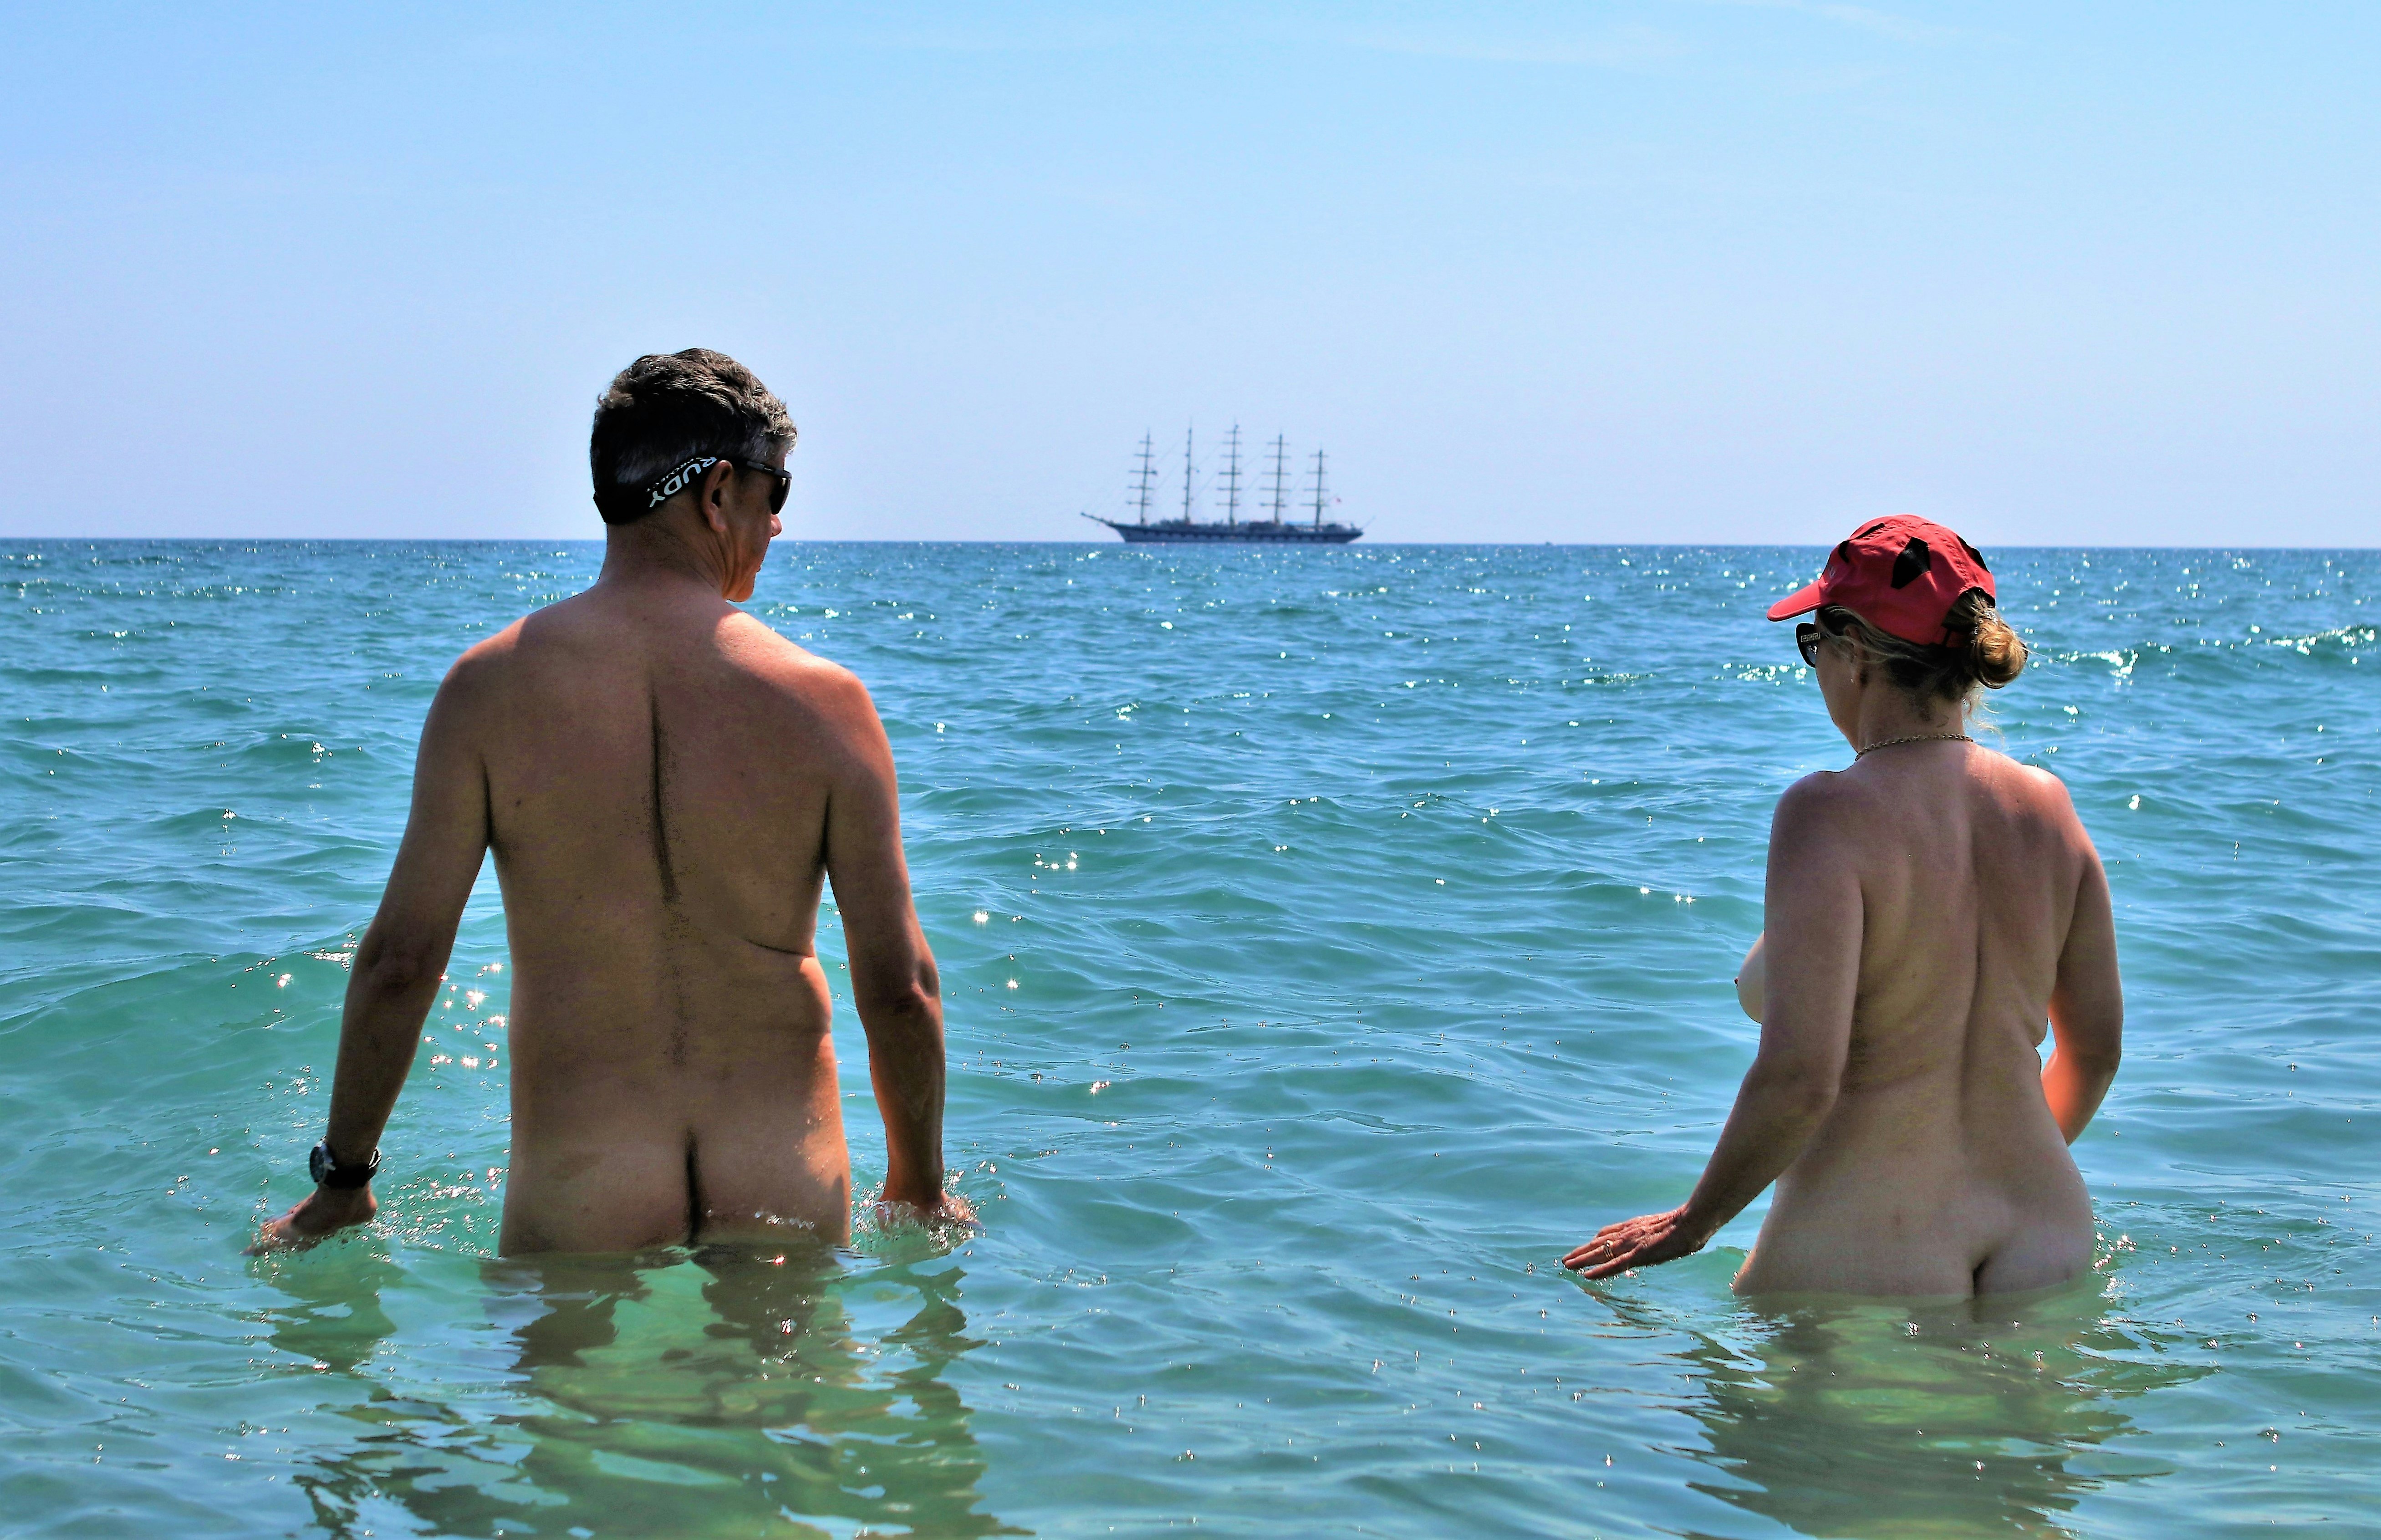 A couple wades through waist-high ocean water completely nude, though the man is wearing shades and the lady is wearing a baseball caps and sunglasses. There is a large schooner boat in the distance.